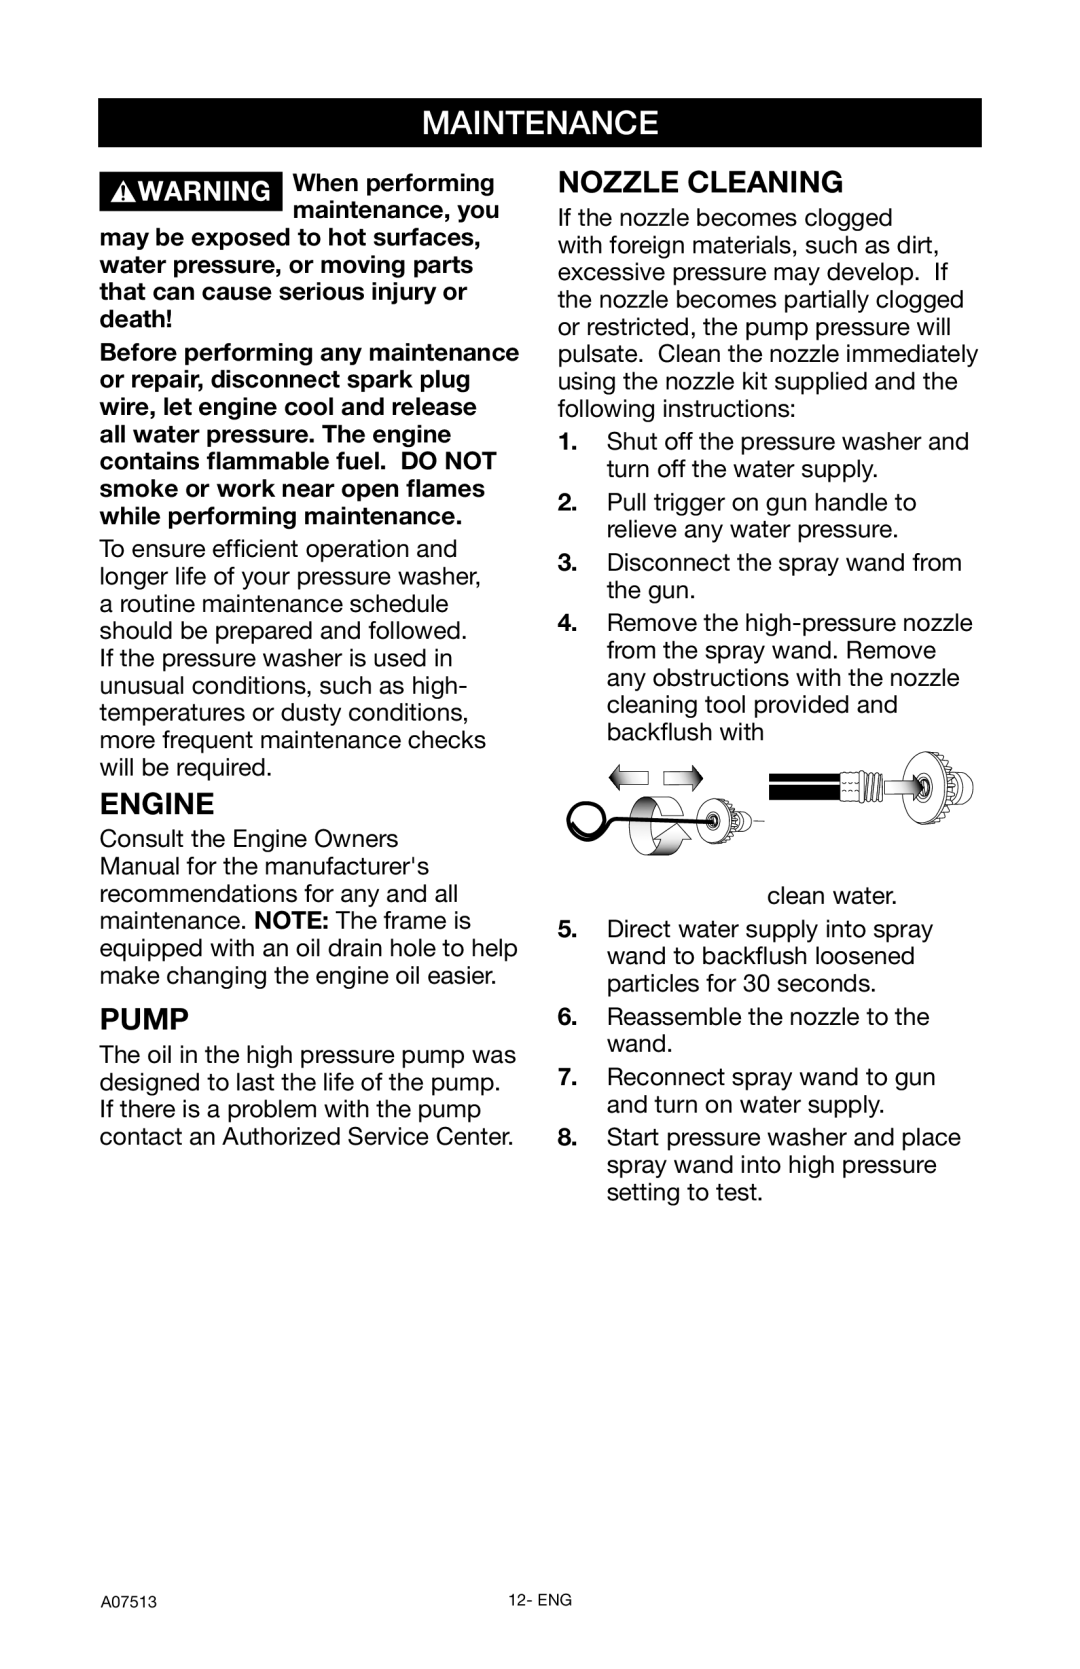 Porter-Cable A07513-0412-0 instruction manual Maintenance, Engine, Pump, Nozzle Cleaning 